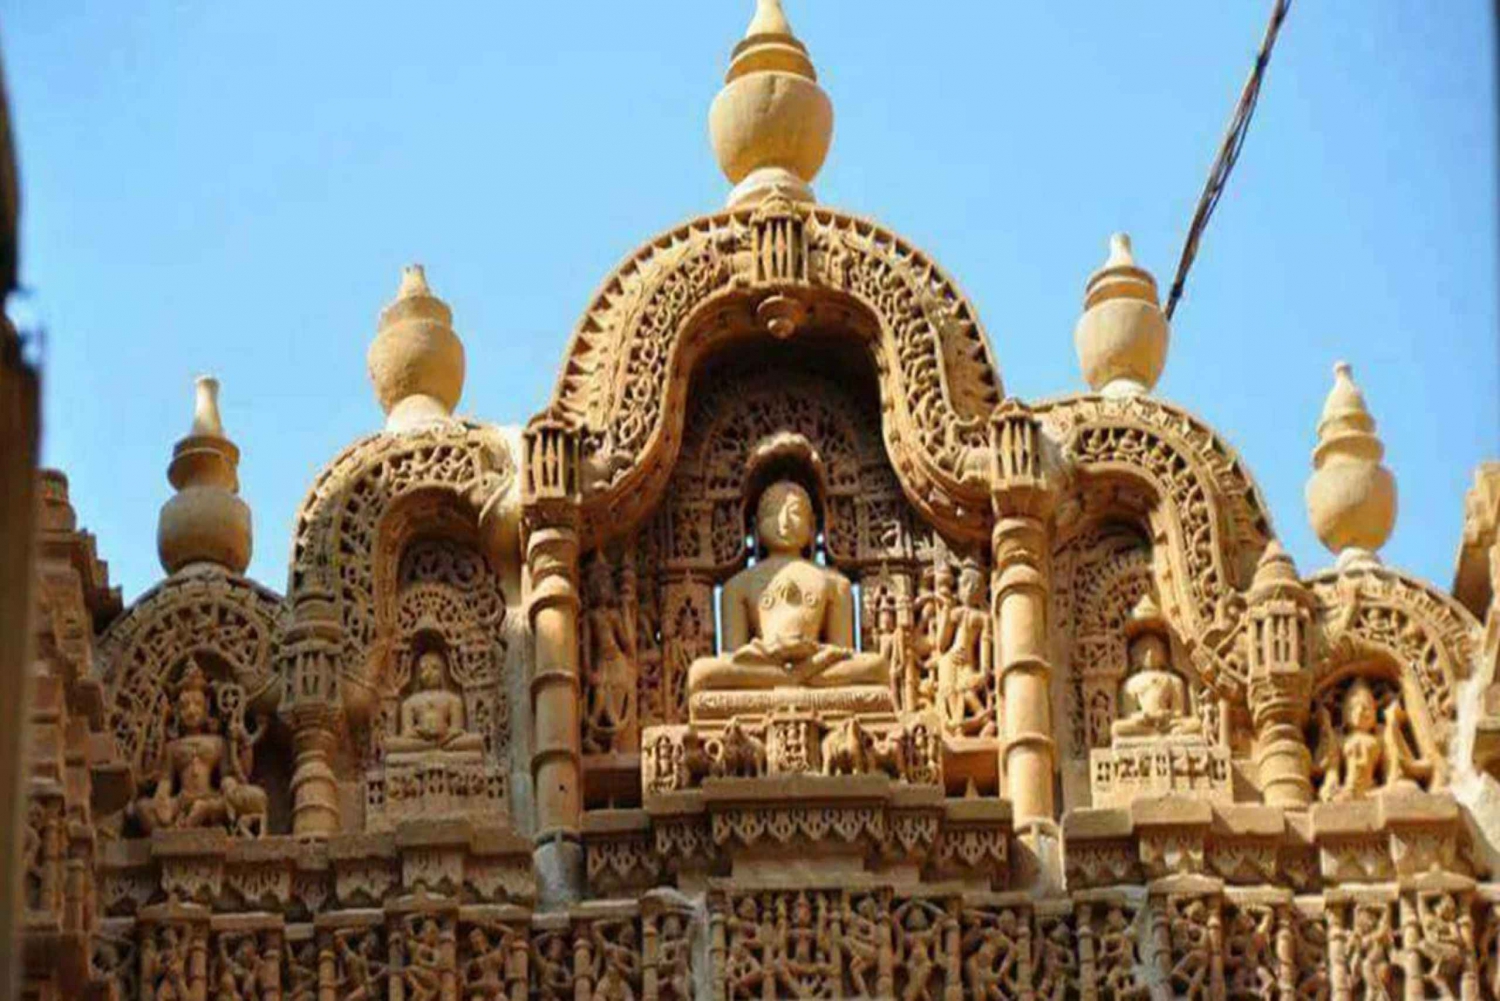 Dilwara Temples & Mount Abu: Private Day Trip with Transfer